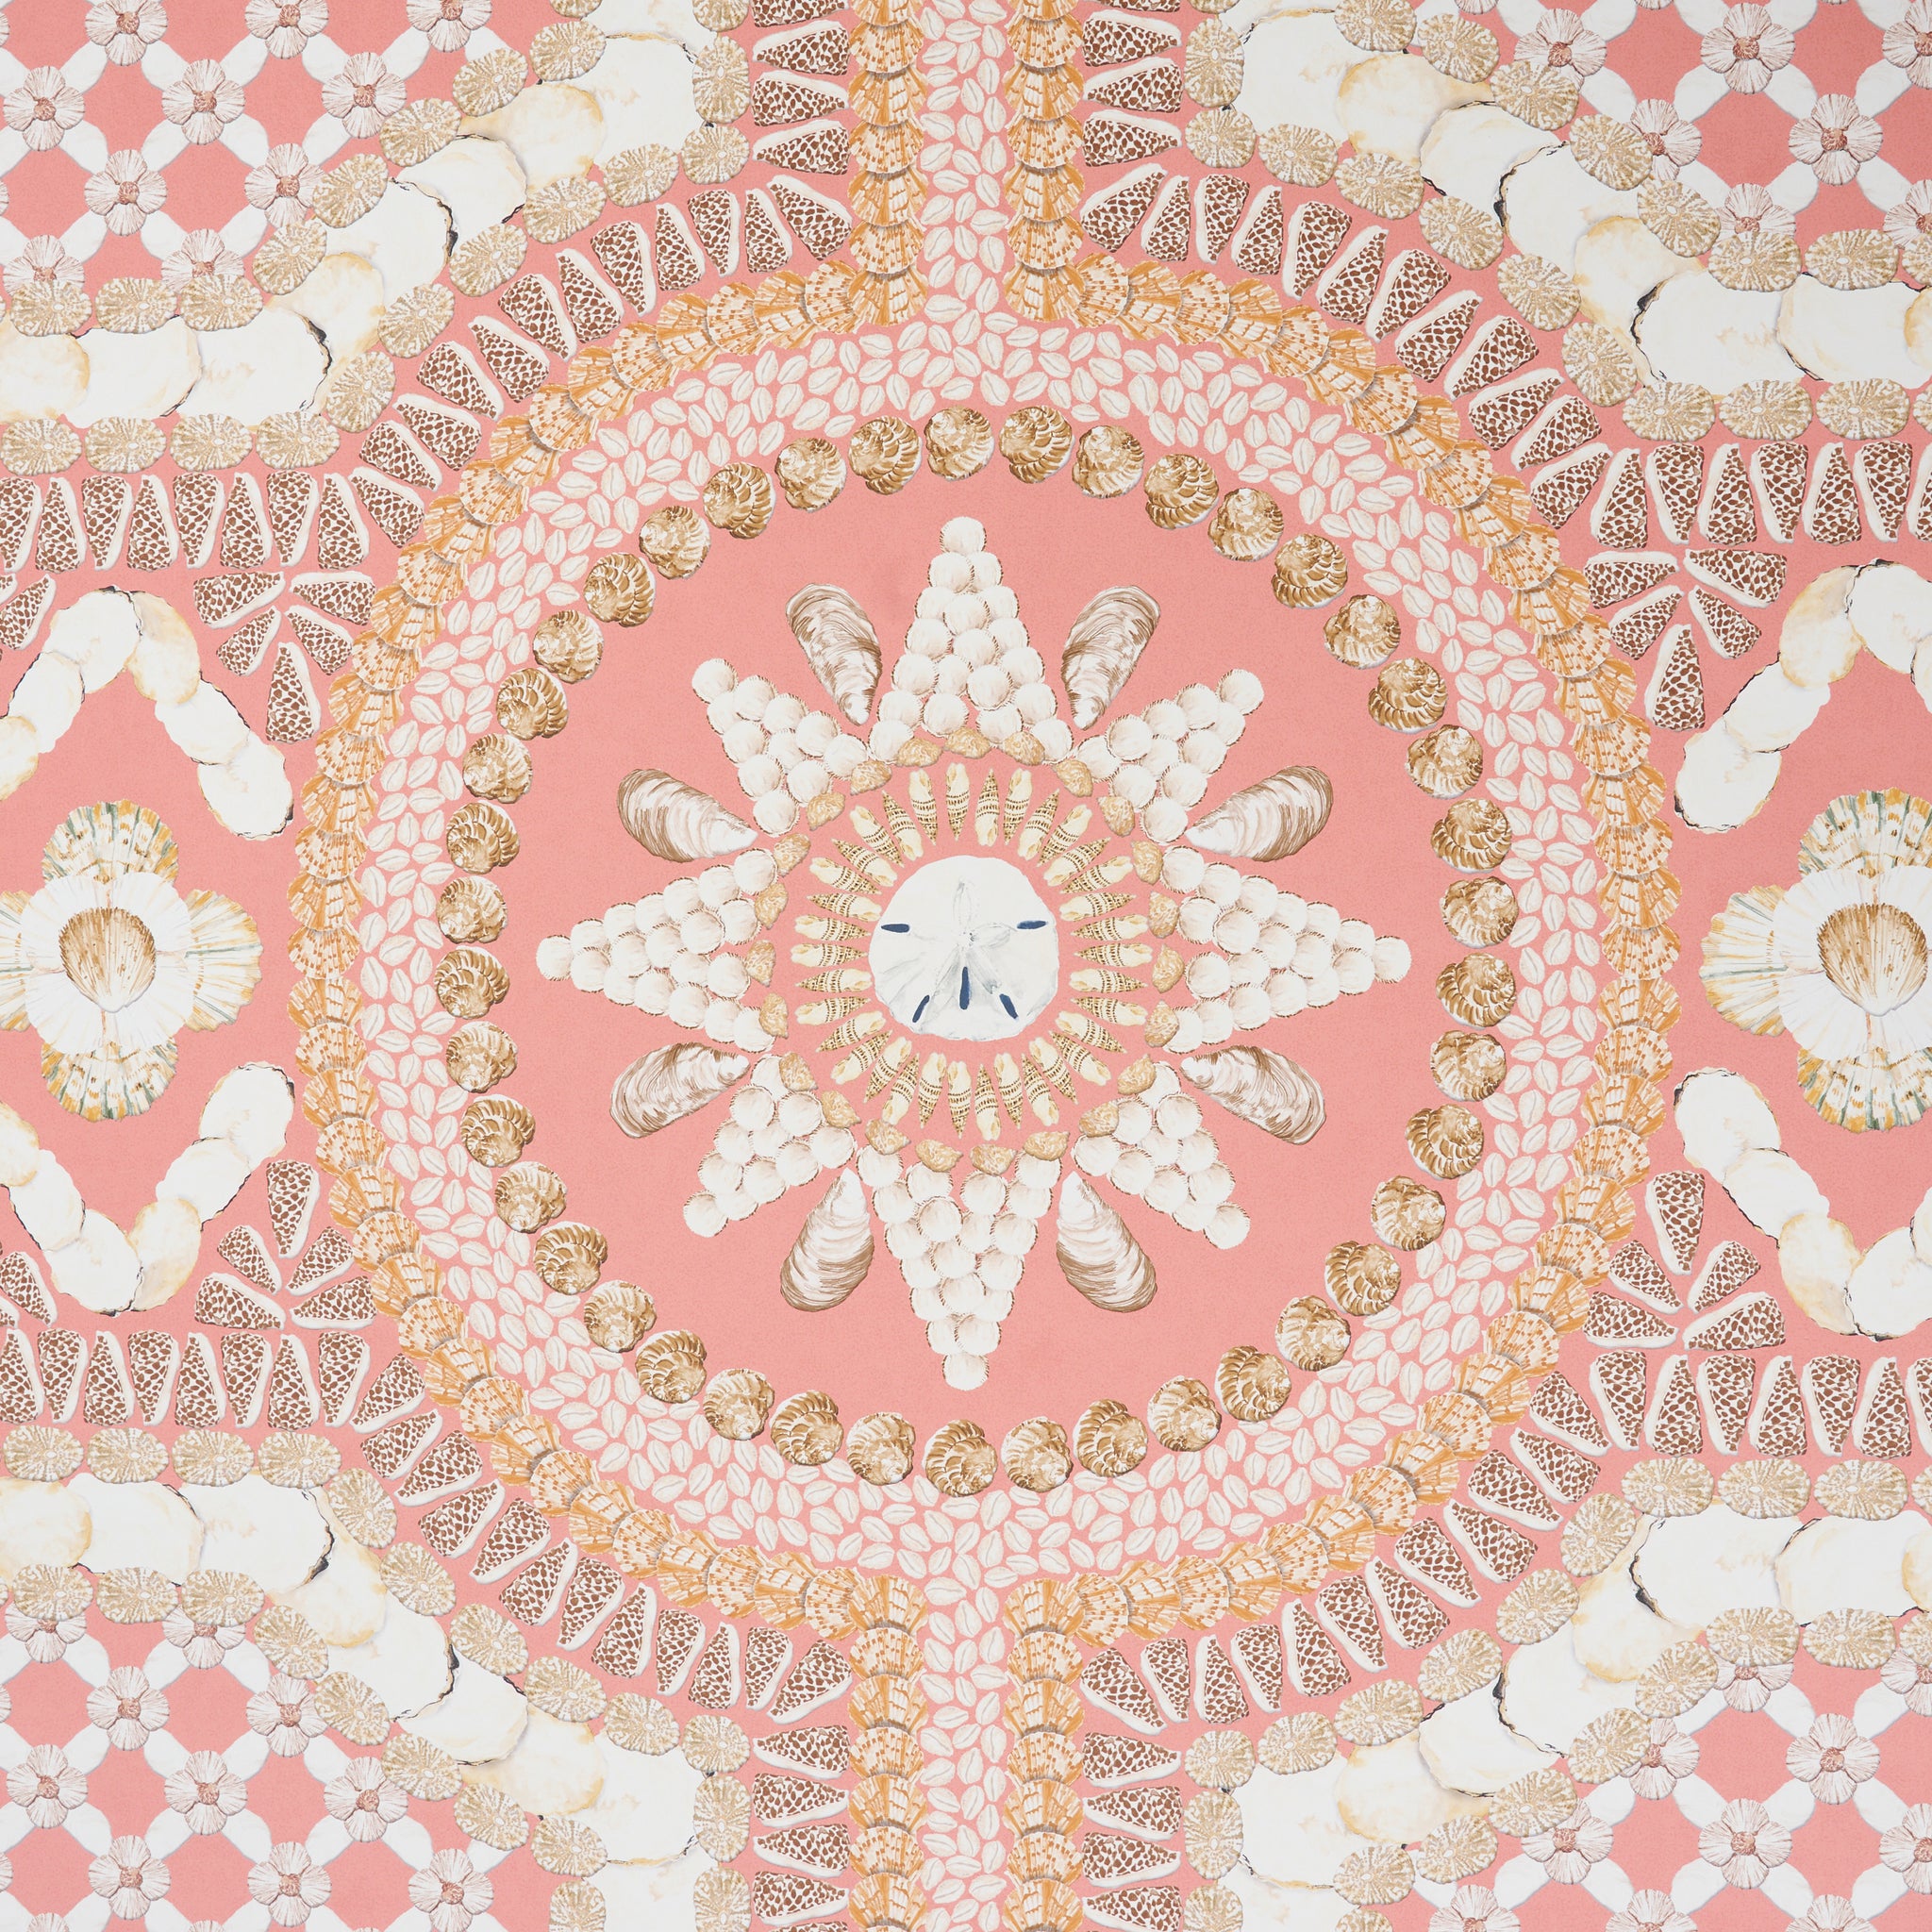 SHELL GROTTO PANEL A | CORAL